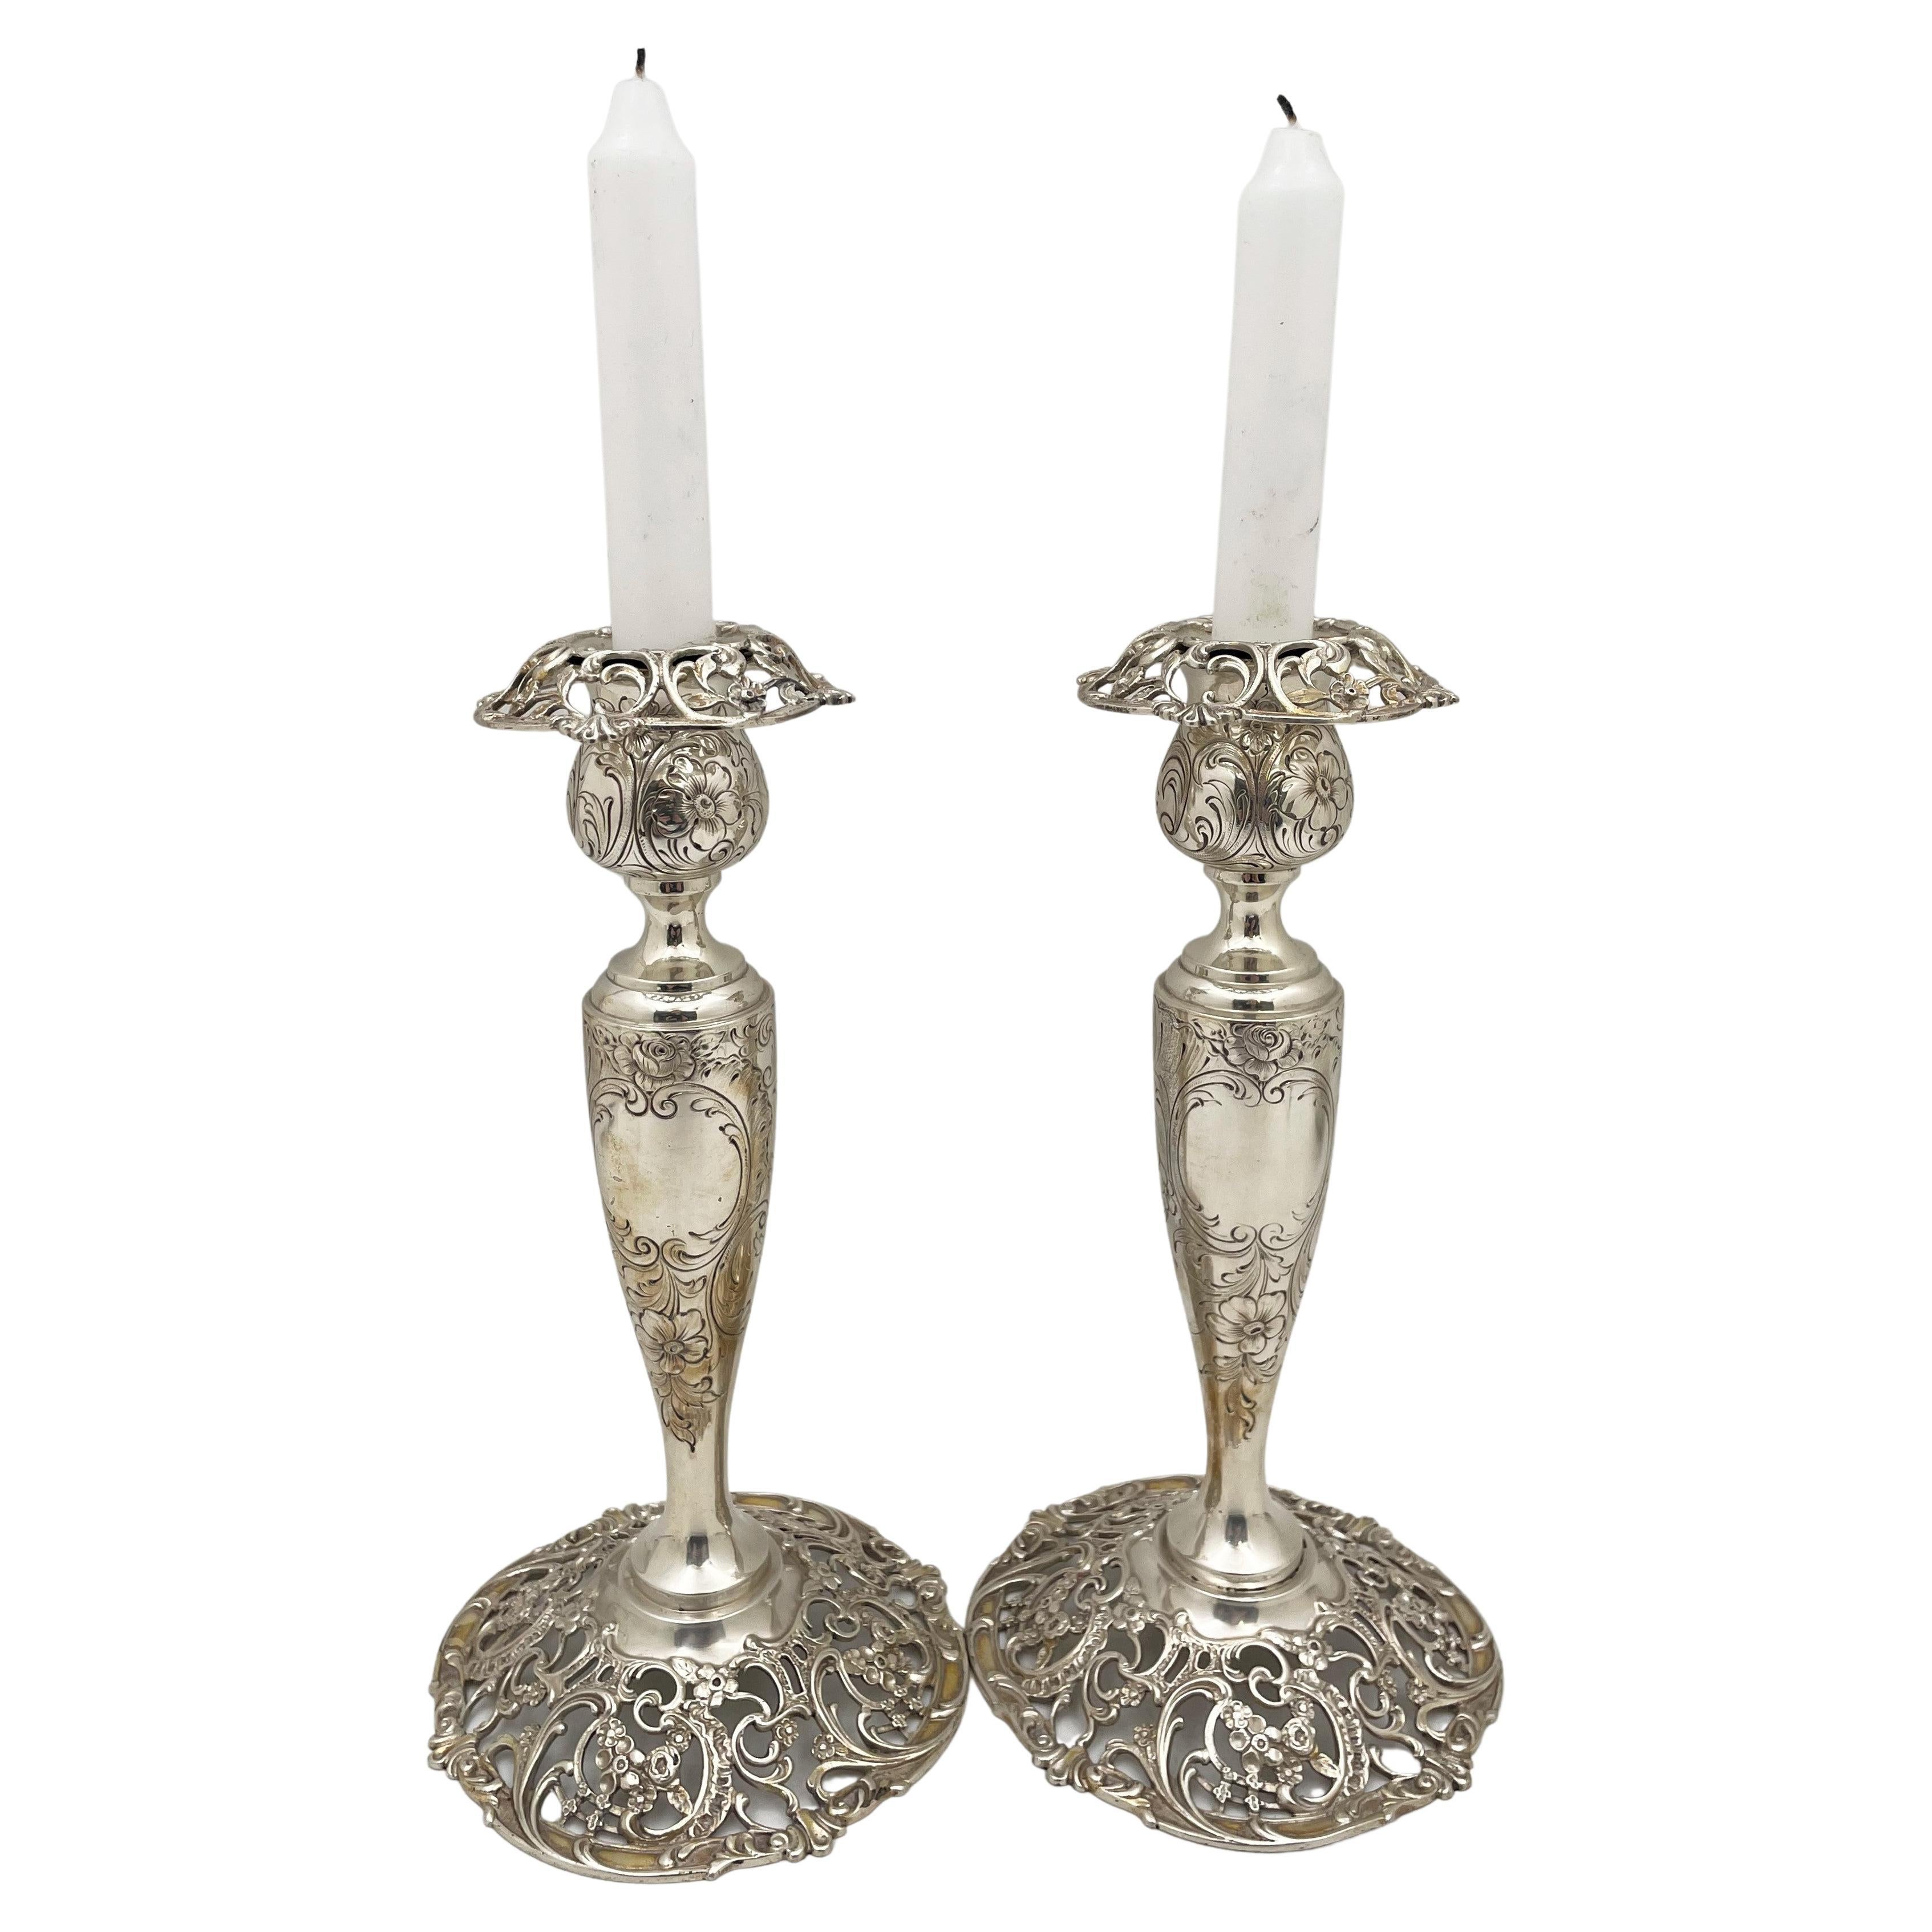 Pair of Sterling Silver Candlesticks in Art Nouveau Style, Early 20th Century